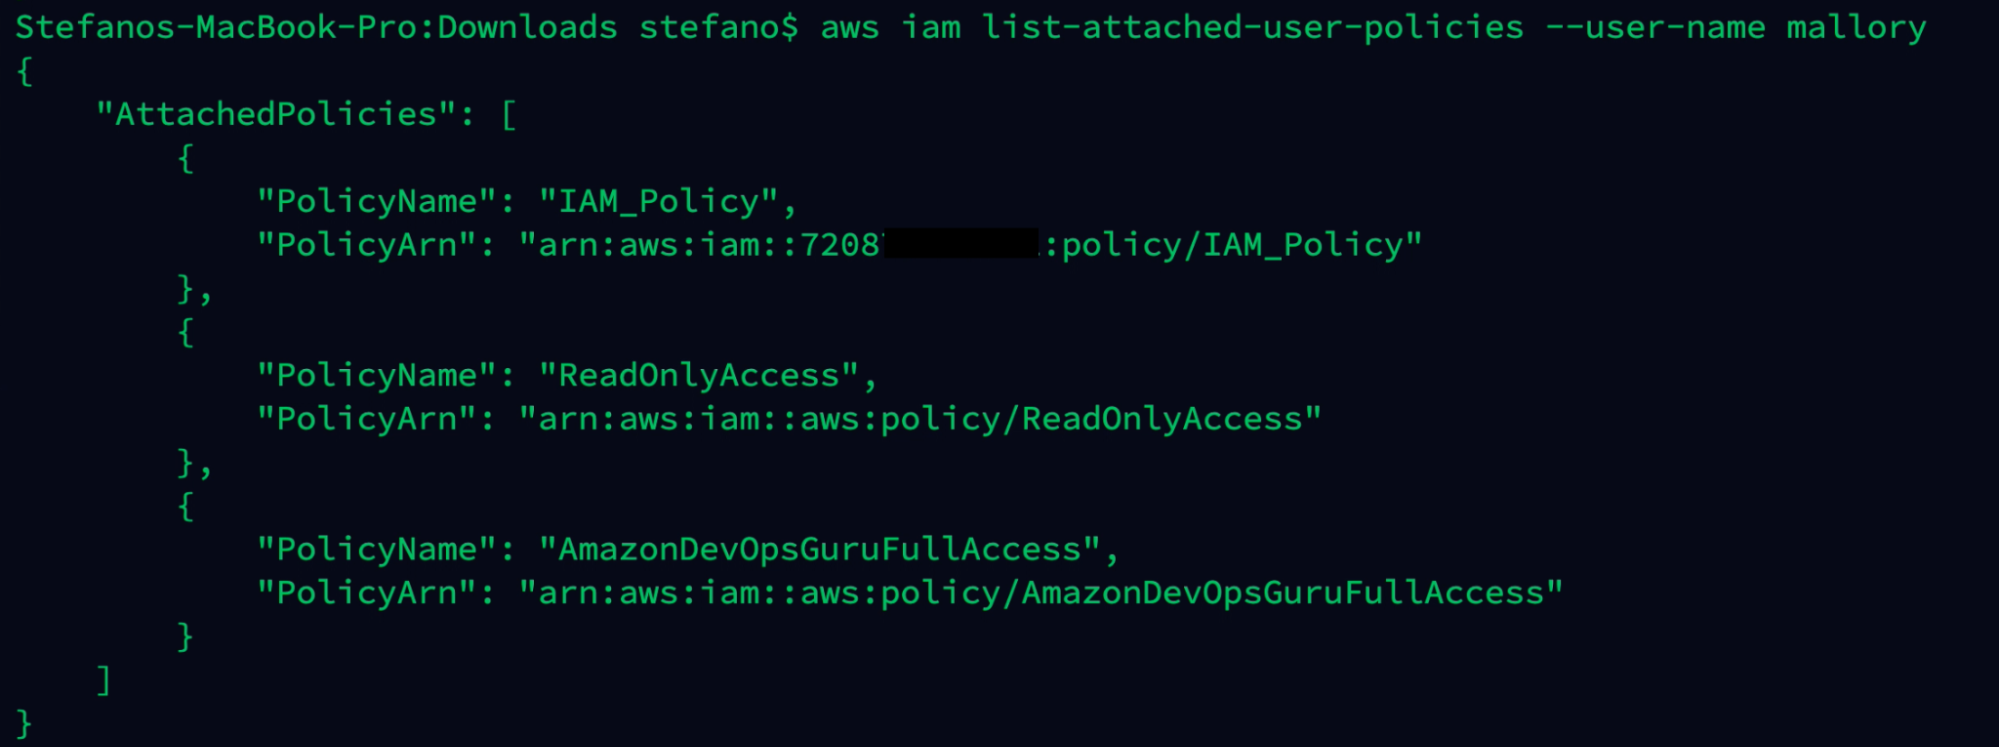 Output AWS command with a list attached user policies